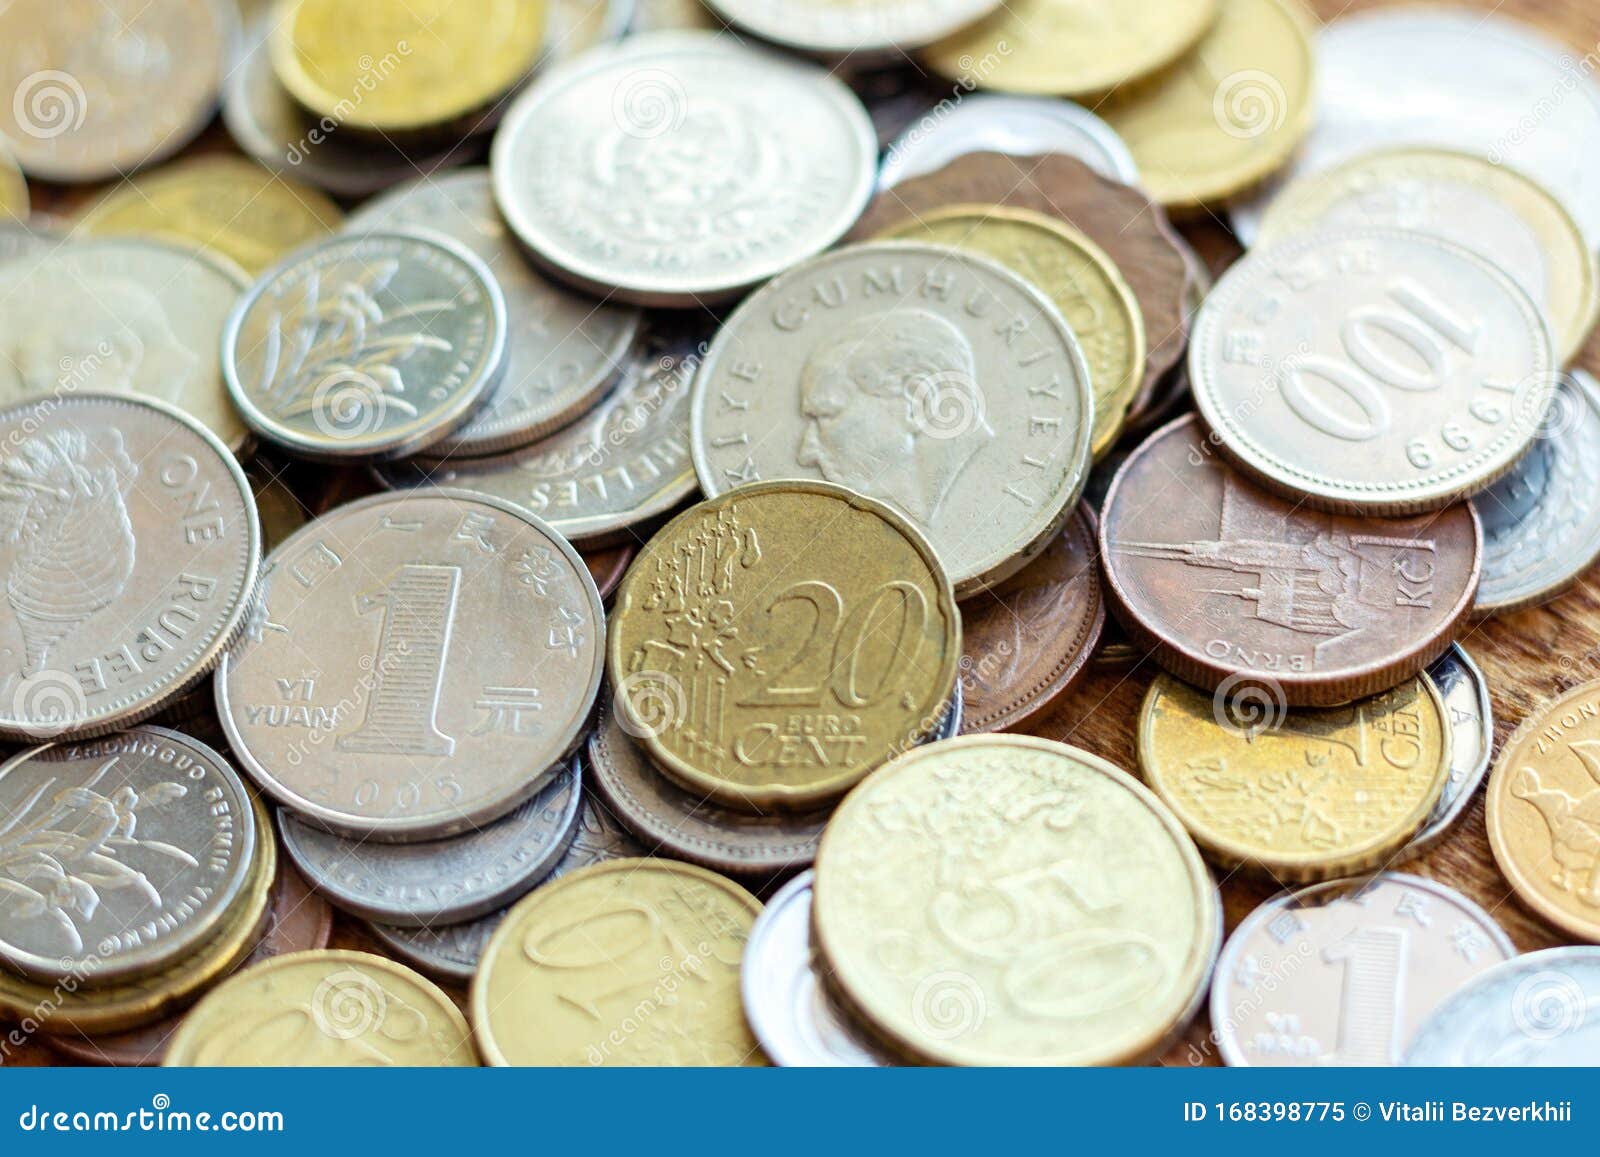 Coins Old Rusty Brass Euro Seychelles Bulgaria China Germany Pile Pack ...